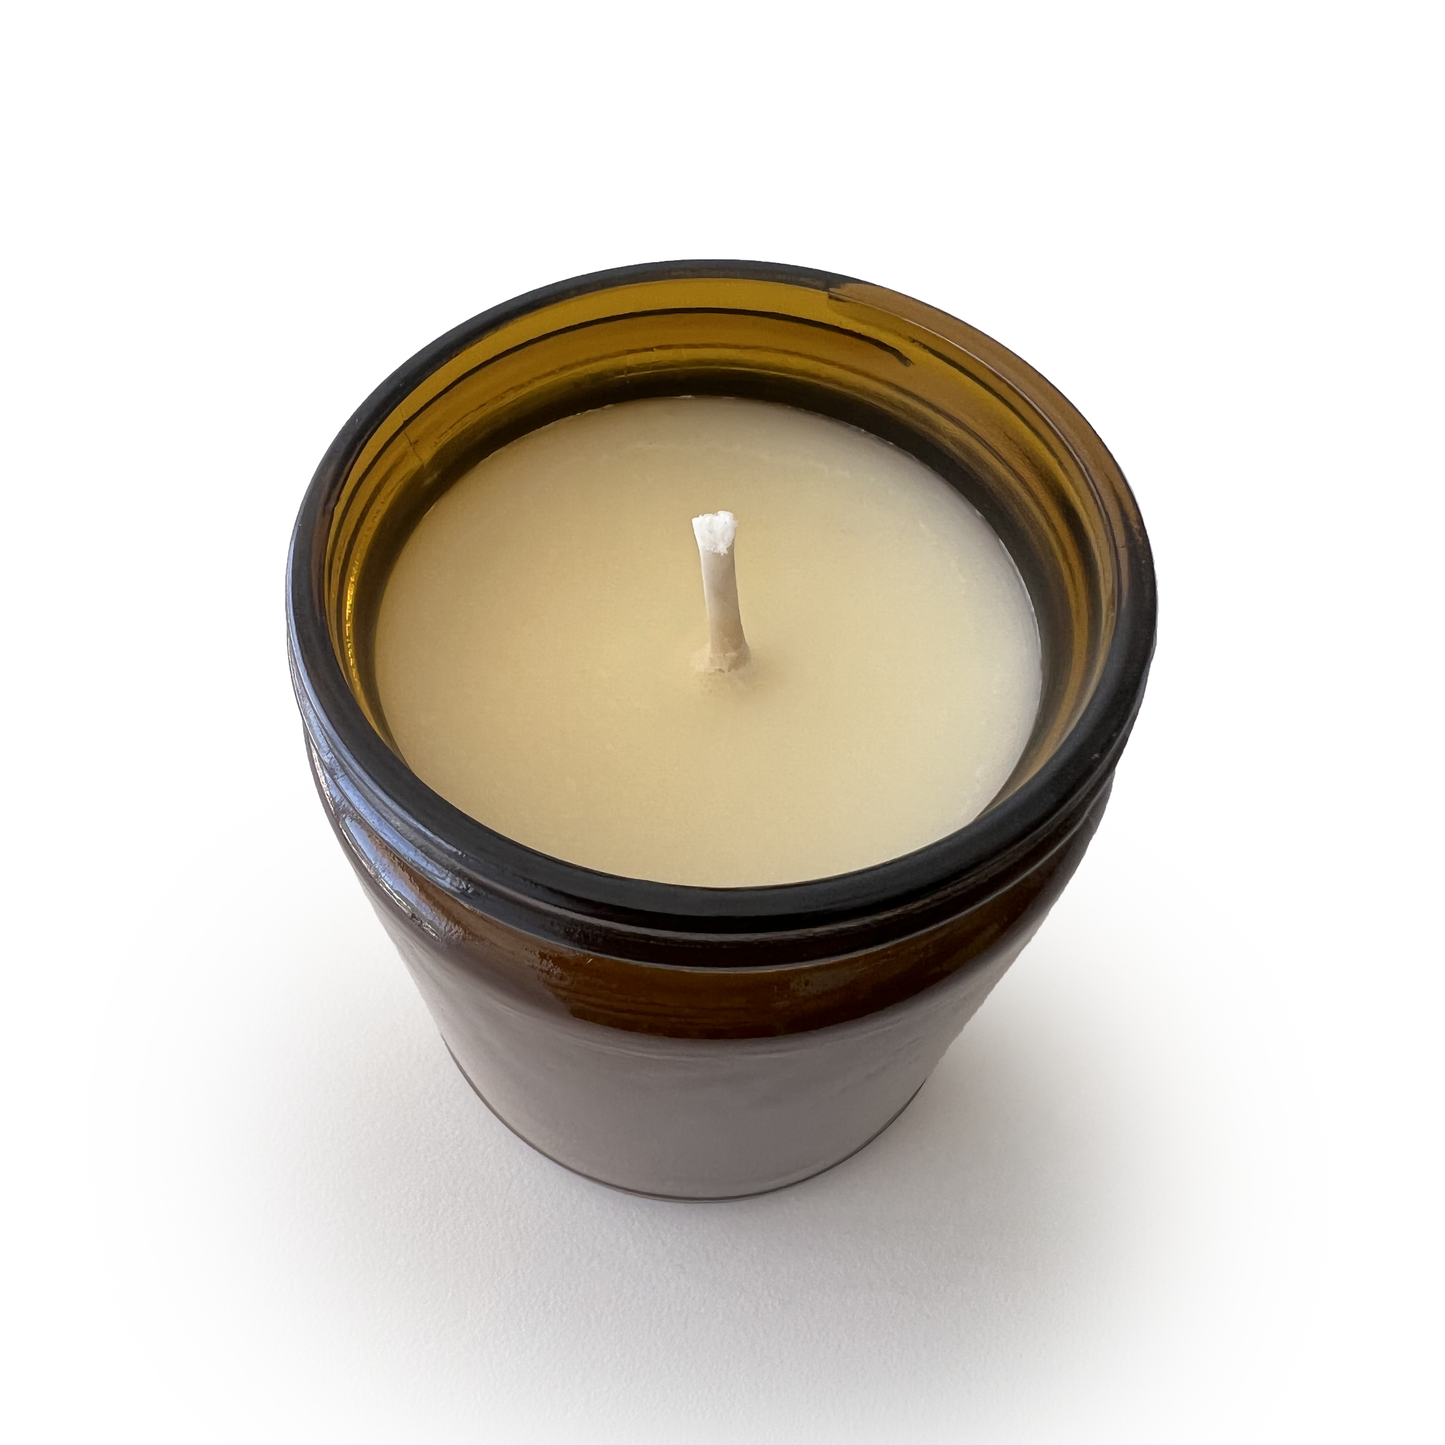 Best Smell Ever - Soy Candle 9oz